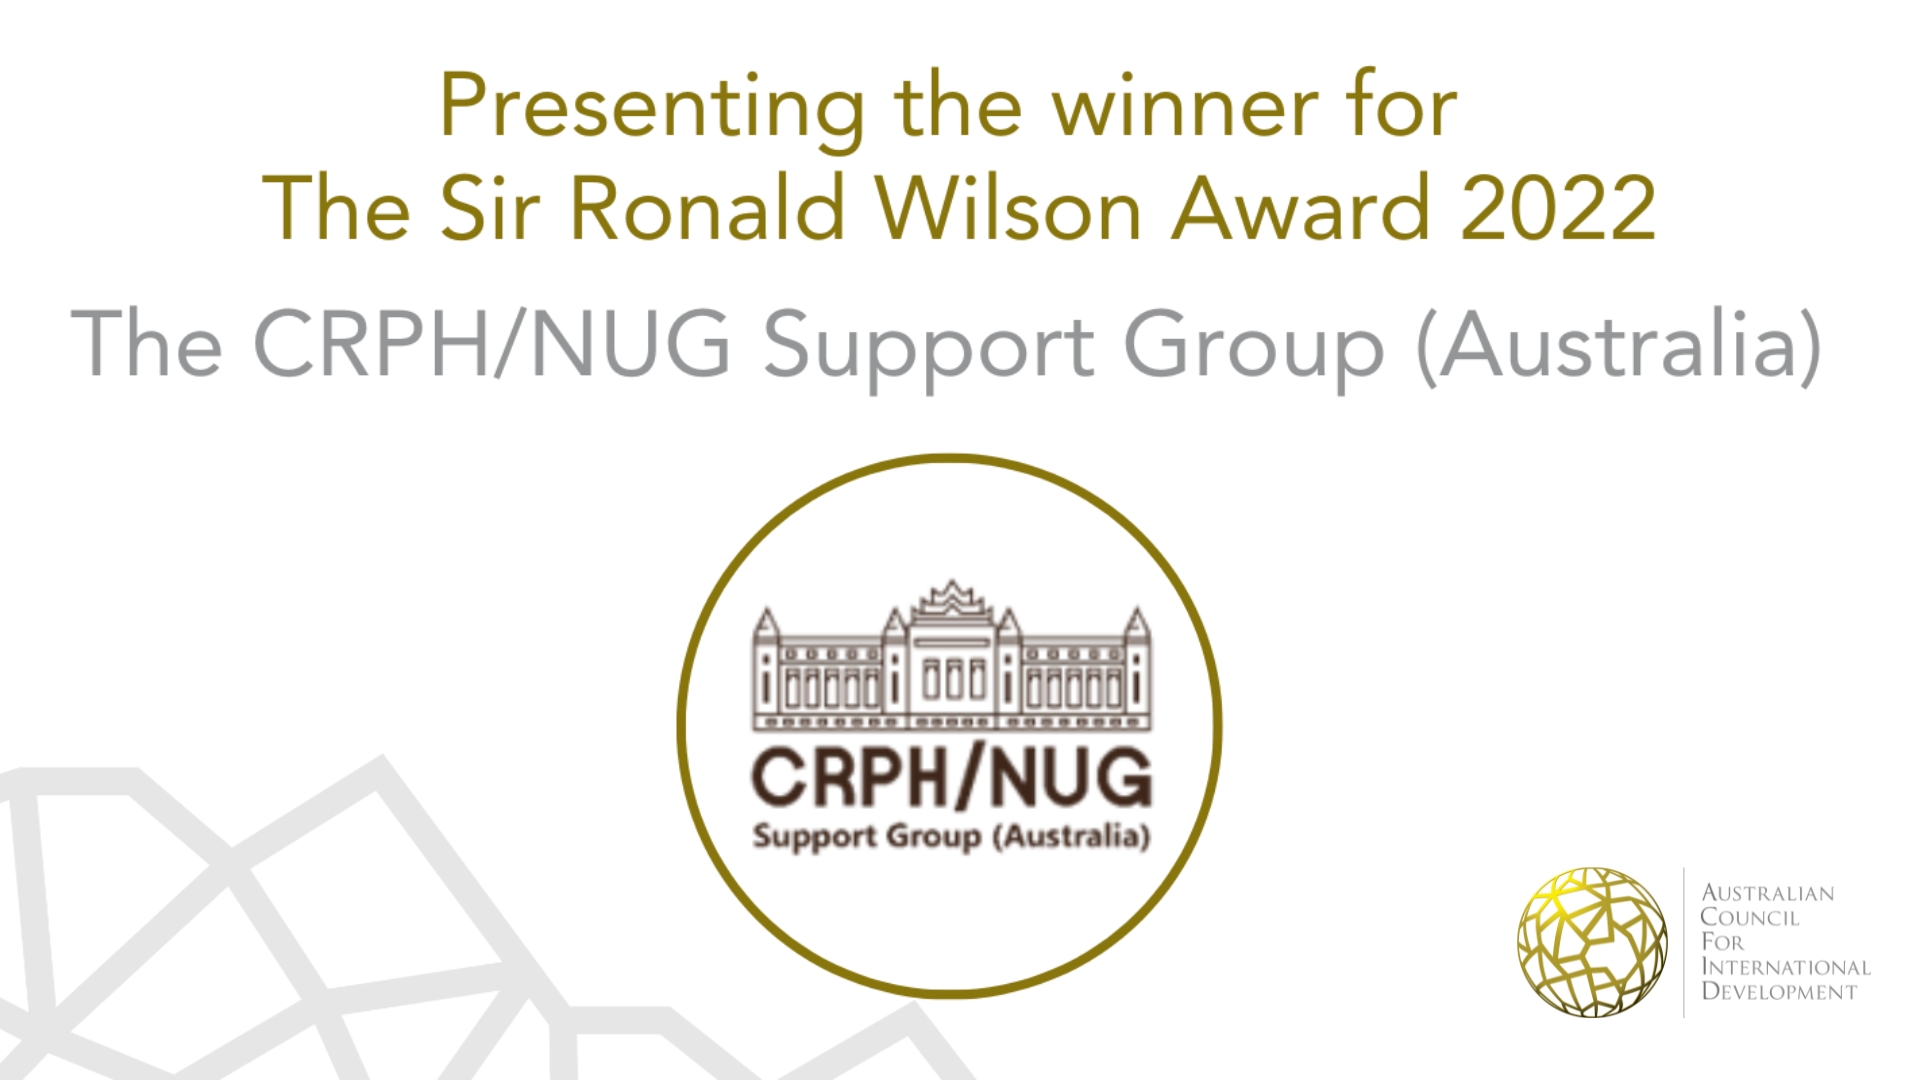 Presenting the winner for the Sir Ronald Wilson Award 2022 - The CRPH/ NUG Support Group Australia with their logo